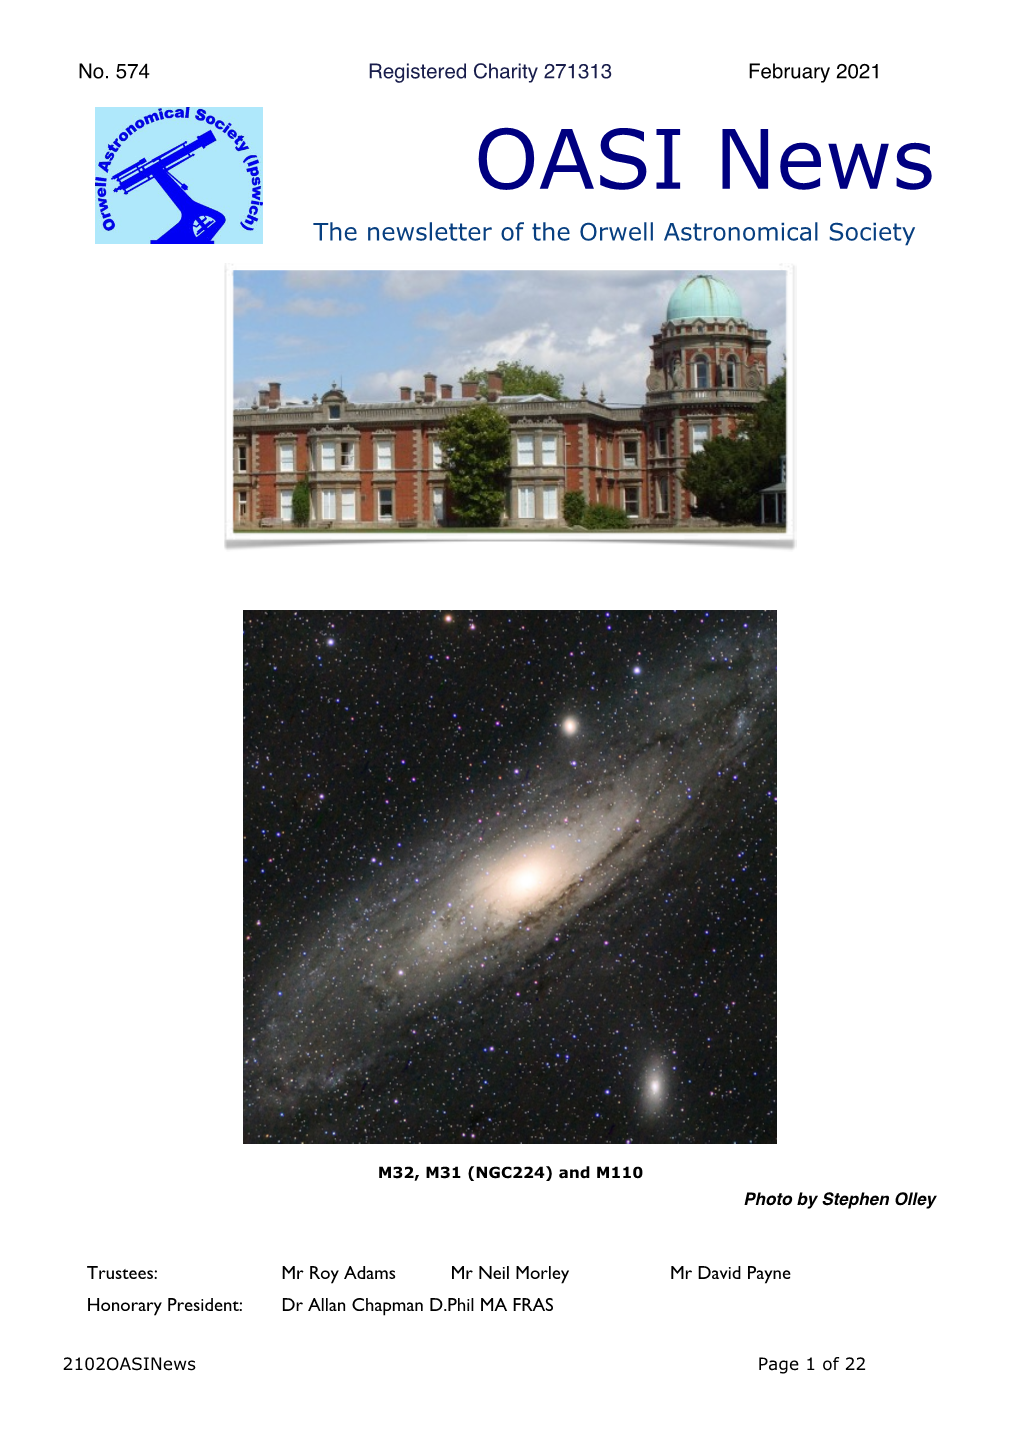 OASI News the Newsletter of the Orwell Astronomical Society